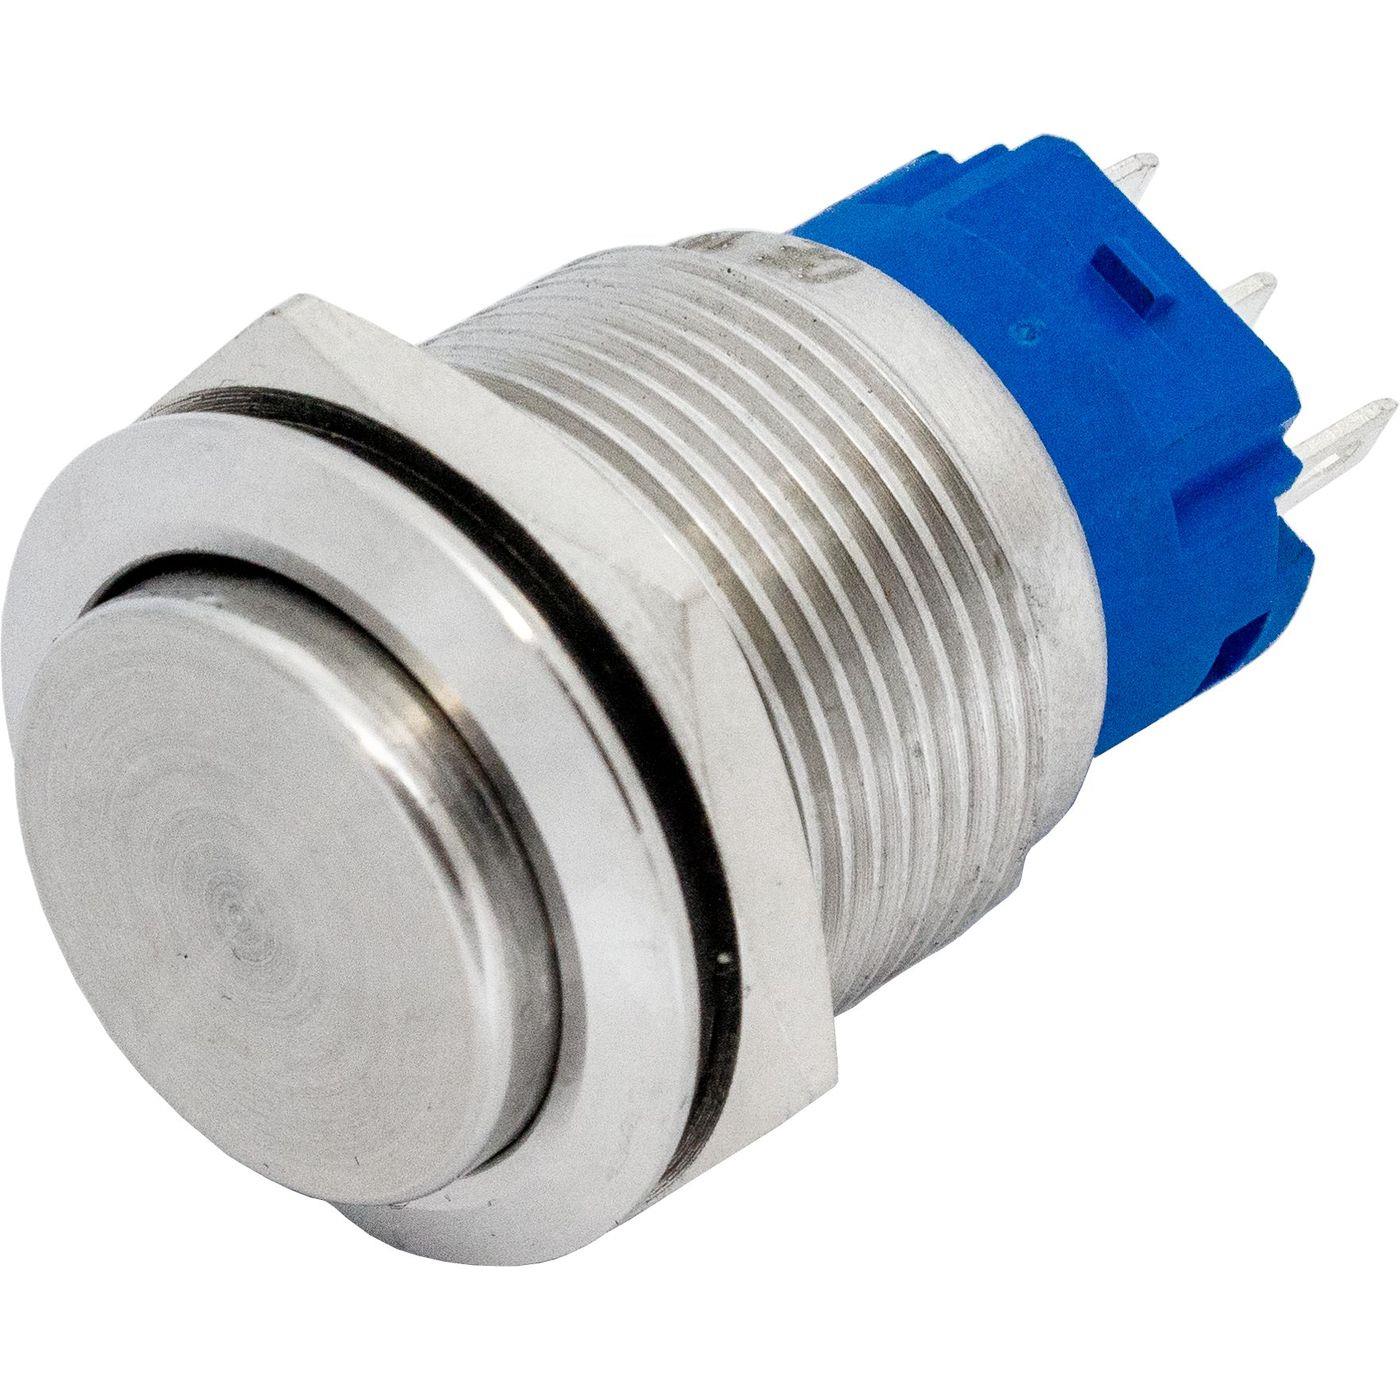 Stainless steel Pressure switch raised Ø19mm IP65 2,8x0,5mm Pins 250V 3A Vandal-proof